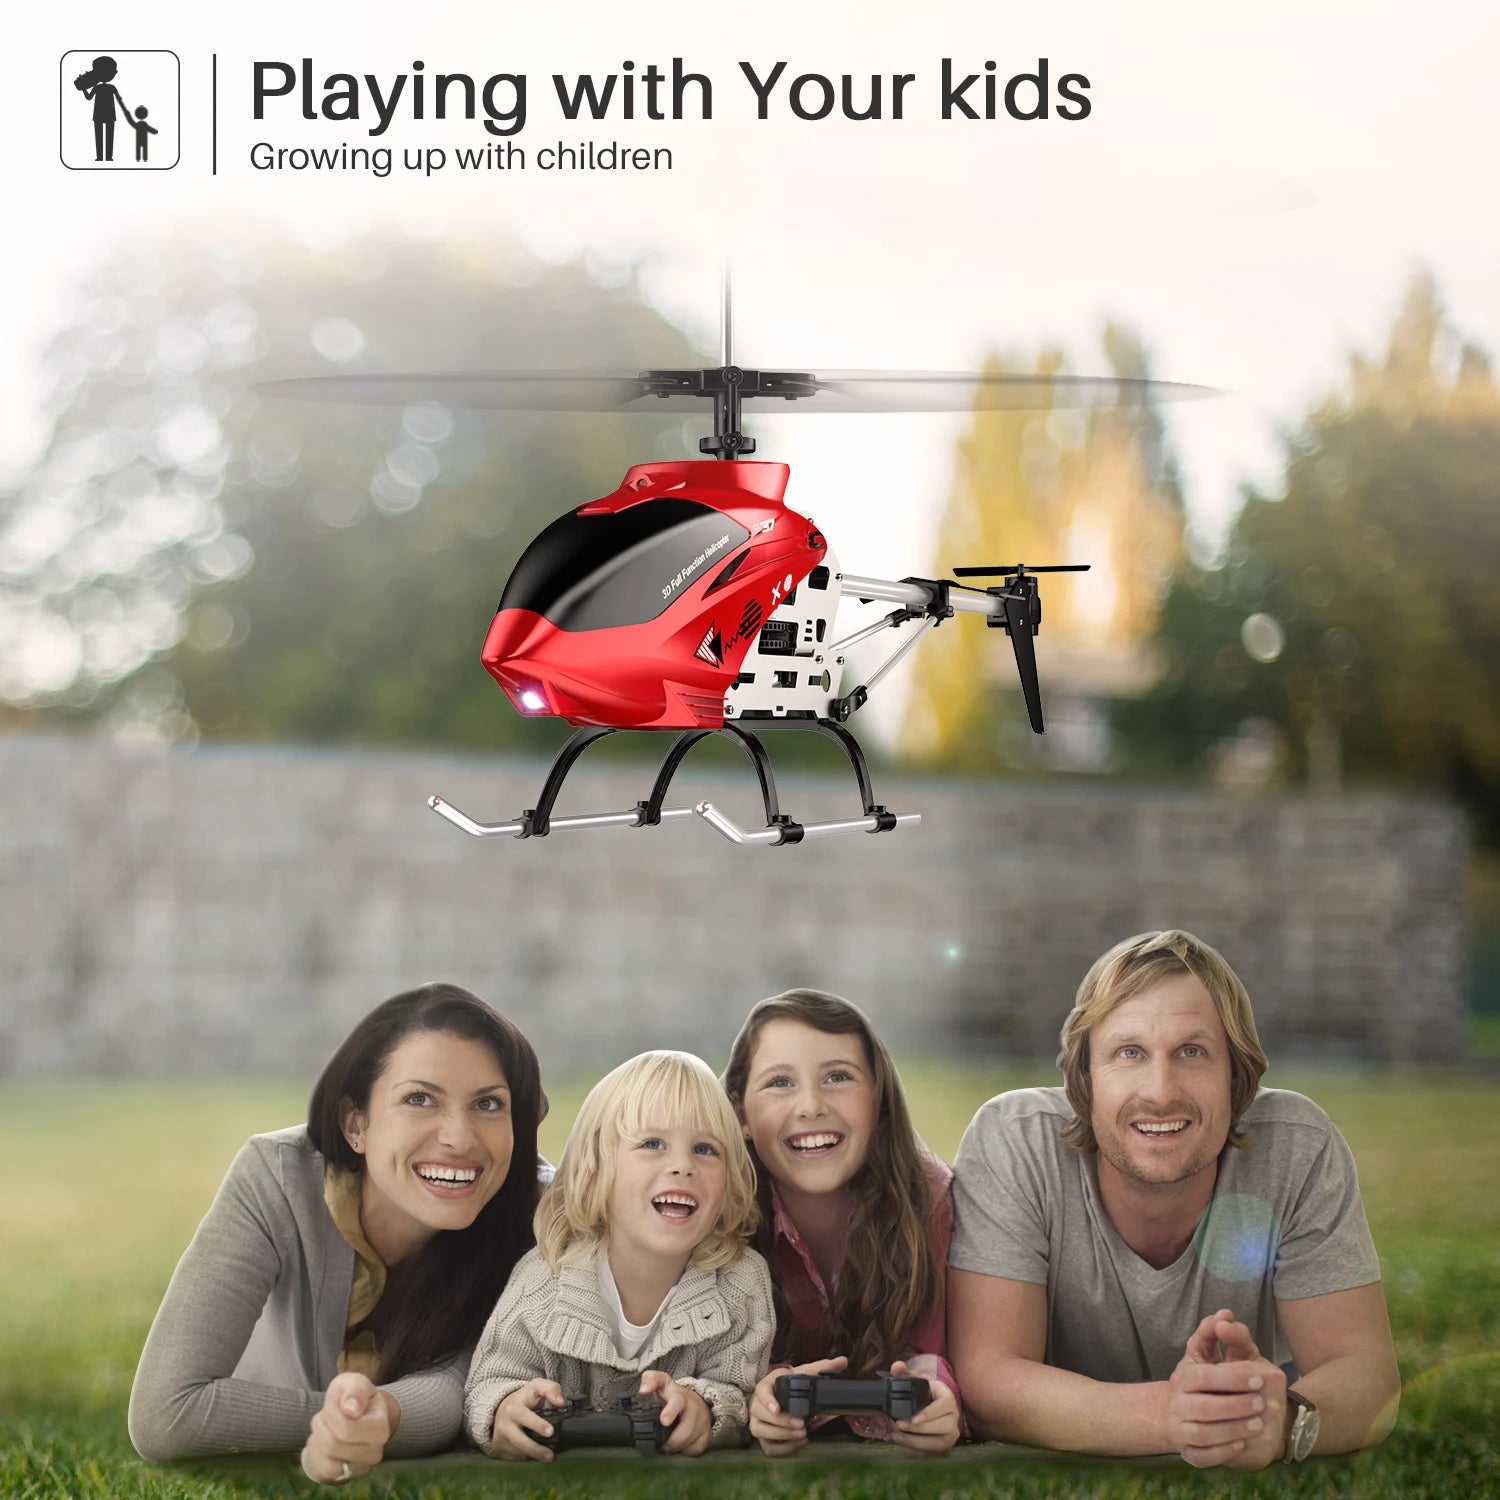 SYMA RC Helicopter, Jofurneiaart: Playing with Your kids Growing up